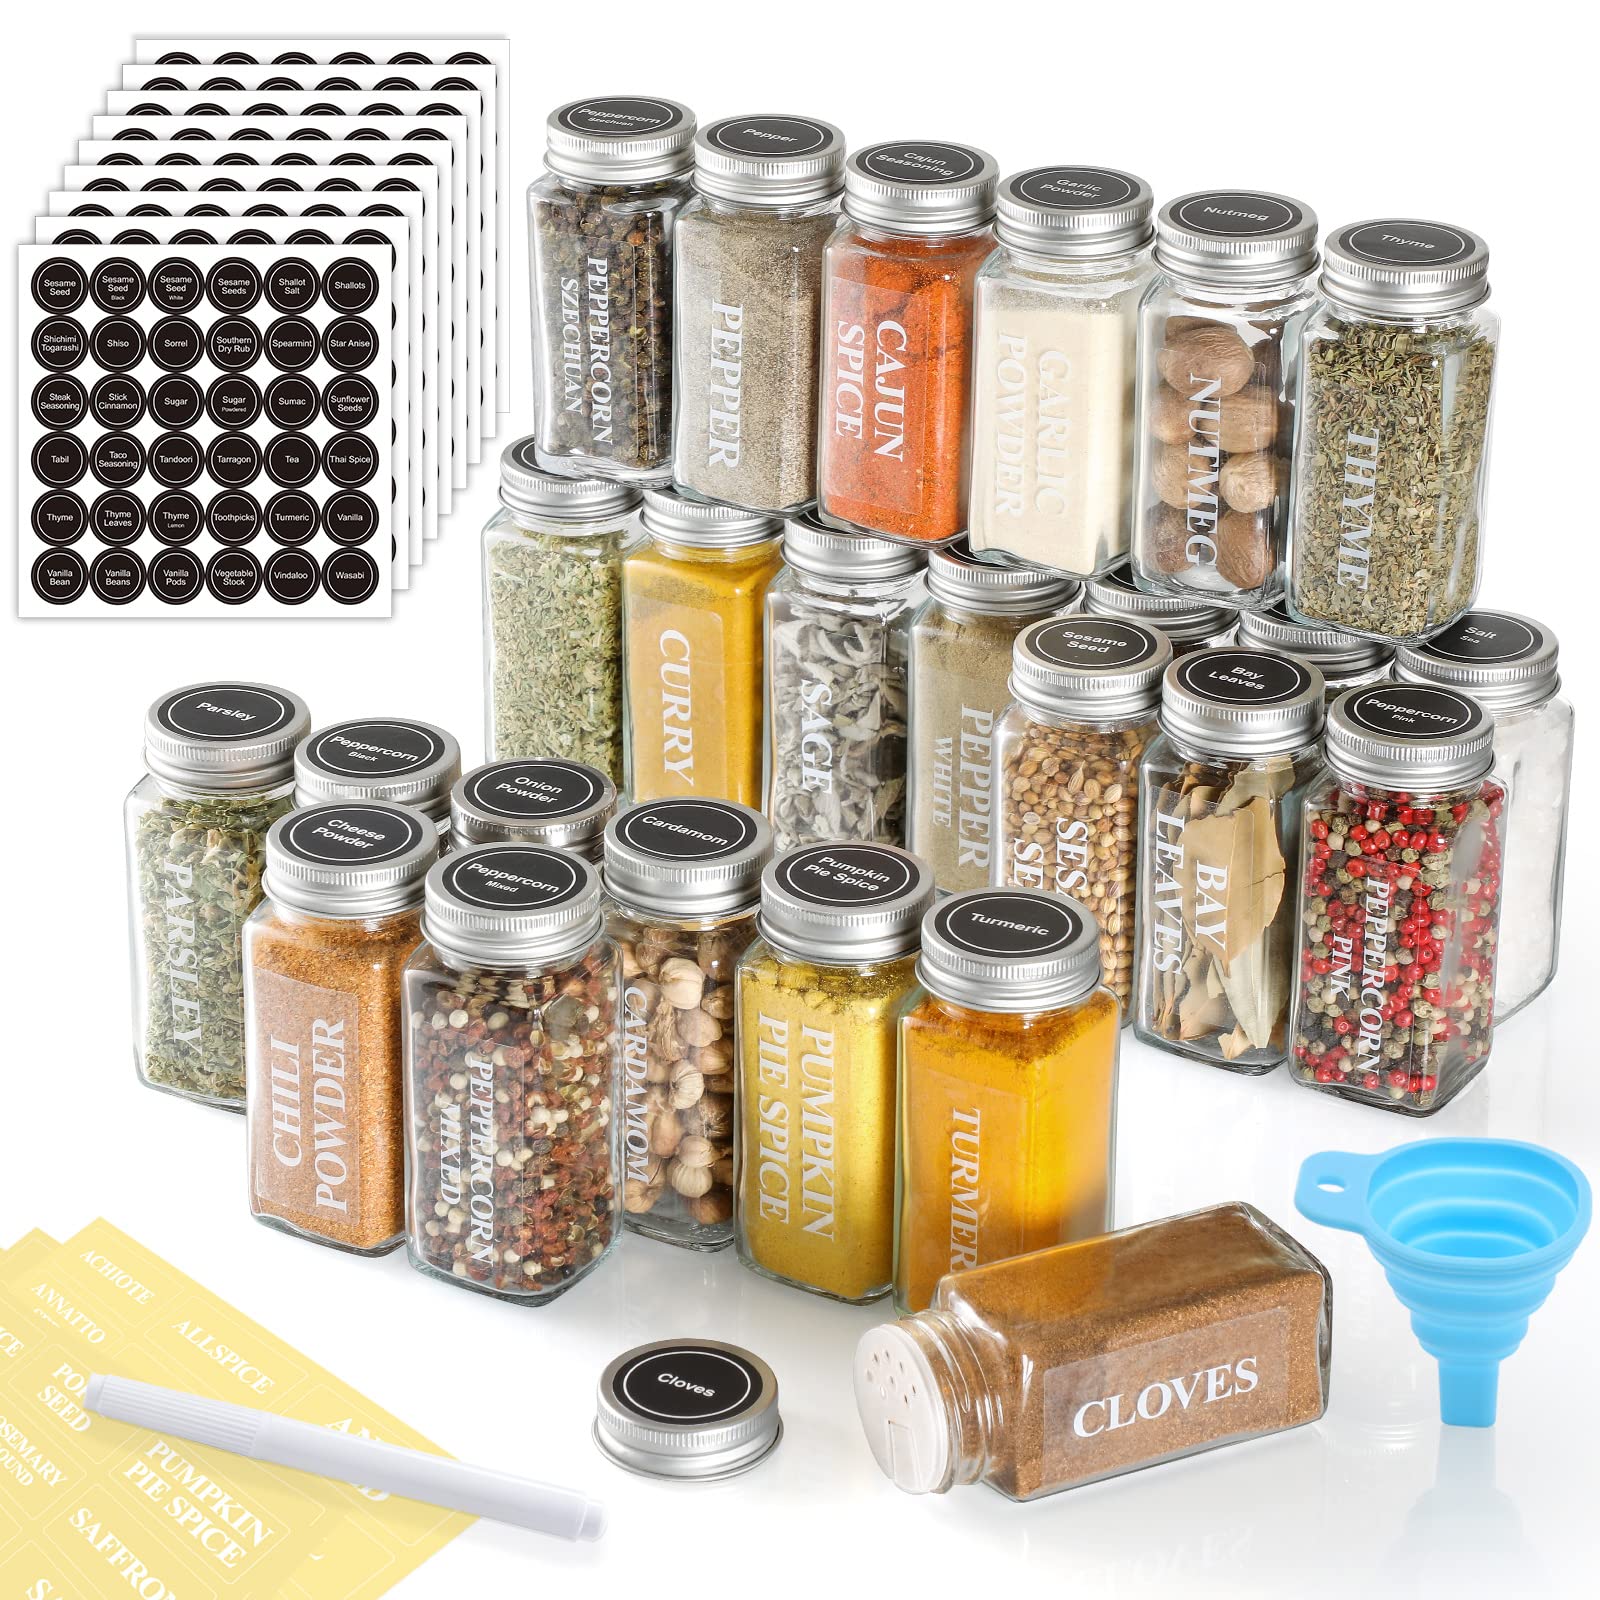 AOZITA 36 Pcs Glass Spice Jars with Spice Labels - 4oz Empty Square Spice Bottles - Shaker Lids and Airtight Metal Caps - Chalk Marker and Silicone Collapsible Funnel Included